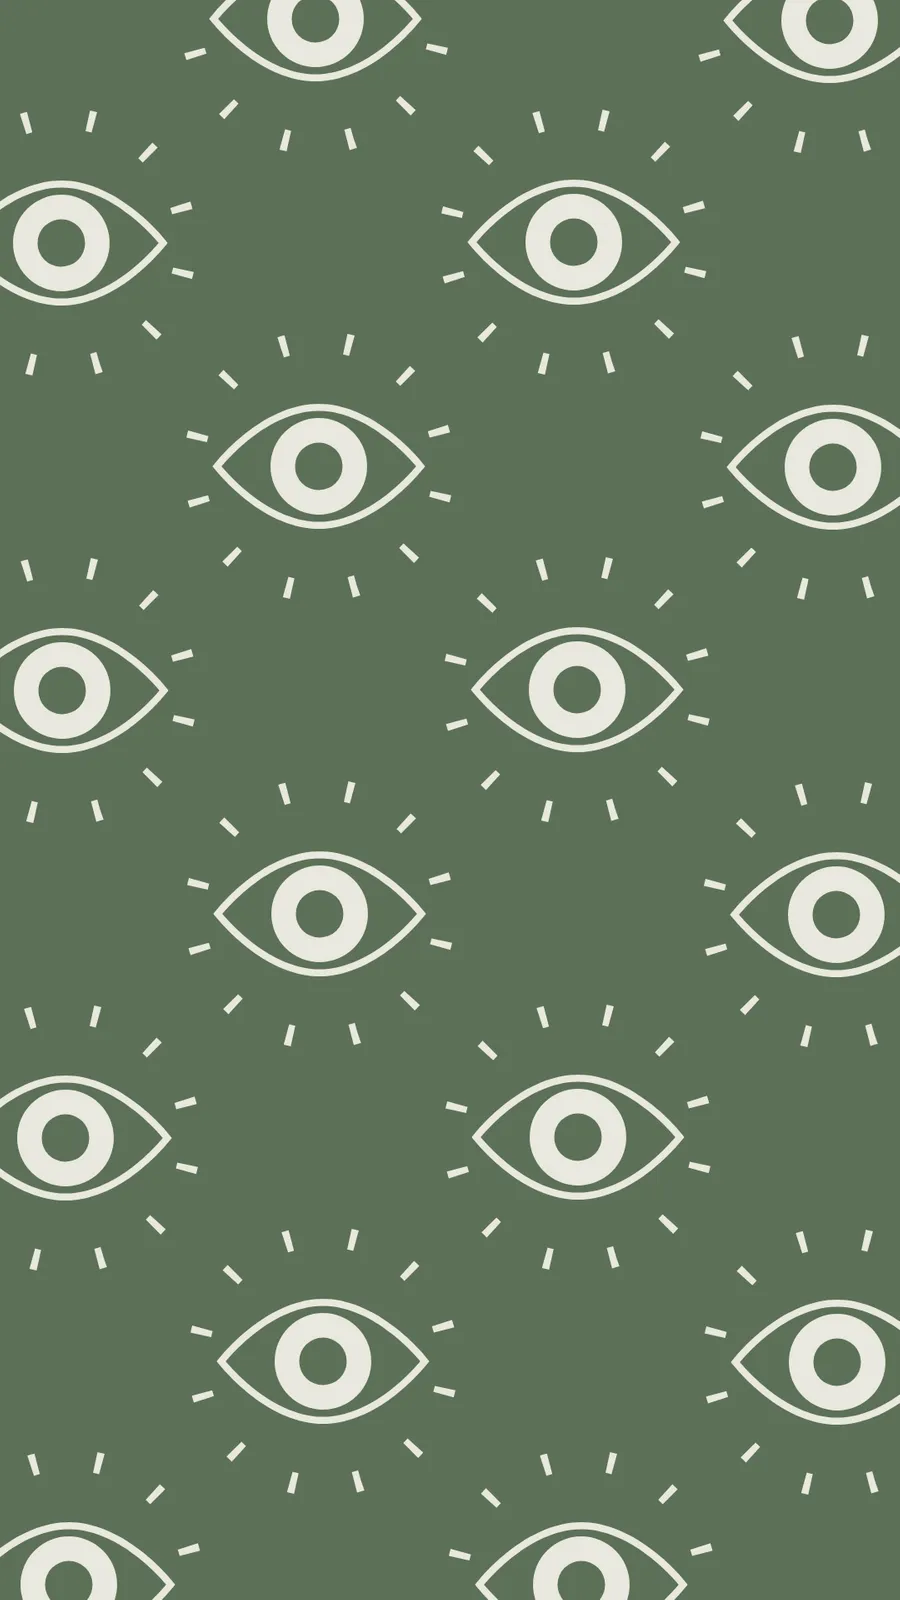 Green eyes icons zoom-backgrounds template